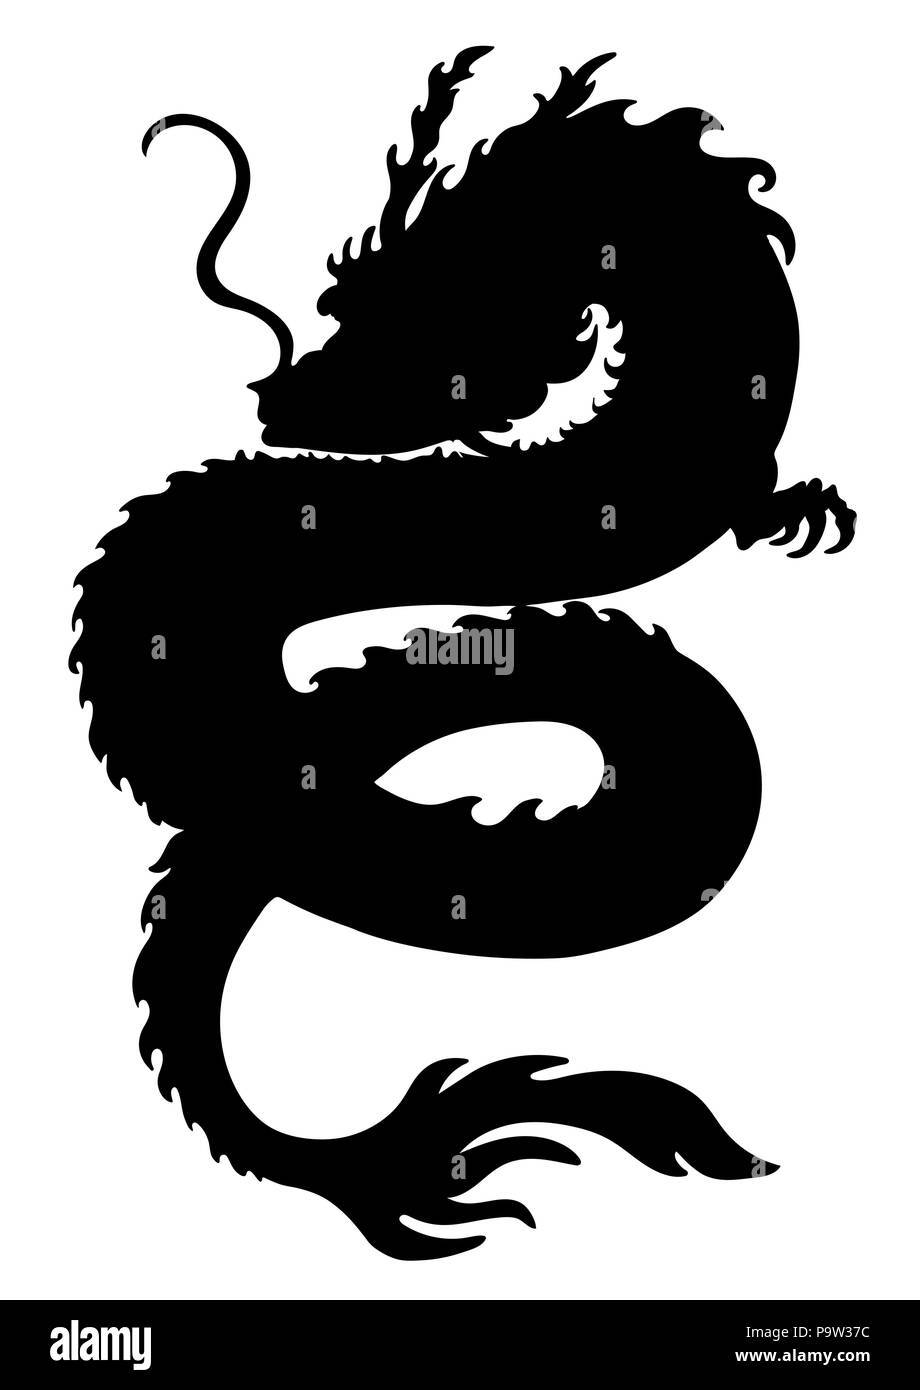 Dragon silhouette, snake shape, icon, logo, outline black and white drawing, stencil, sticker, detailed isolated on white background. Vector illustrat Stock Vector